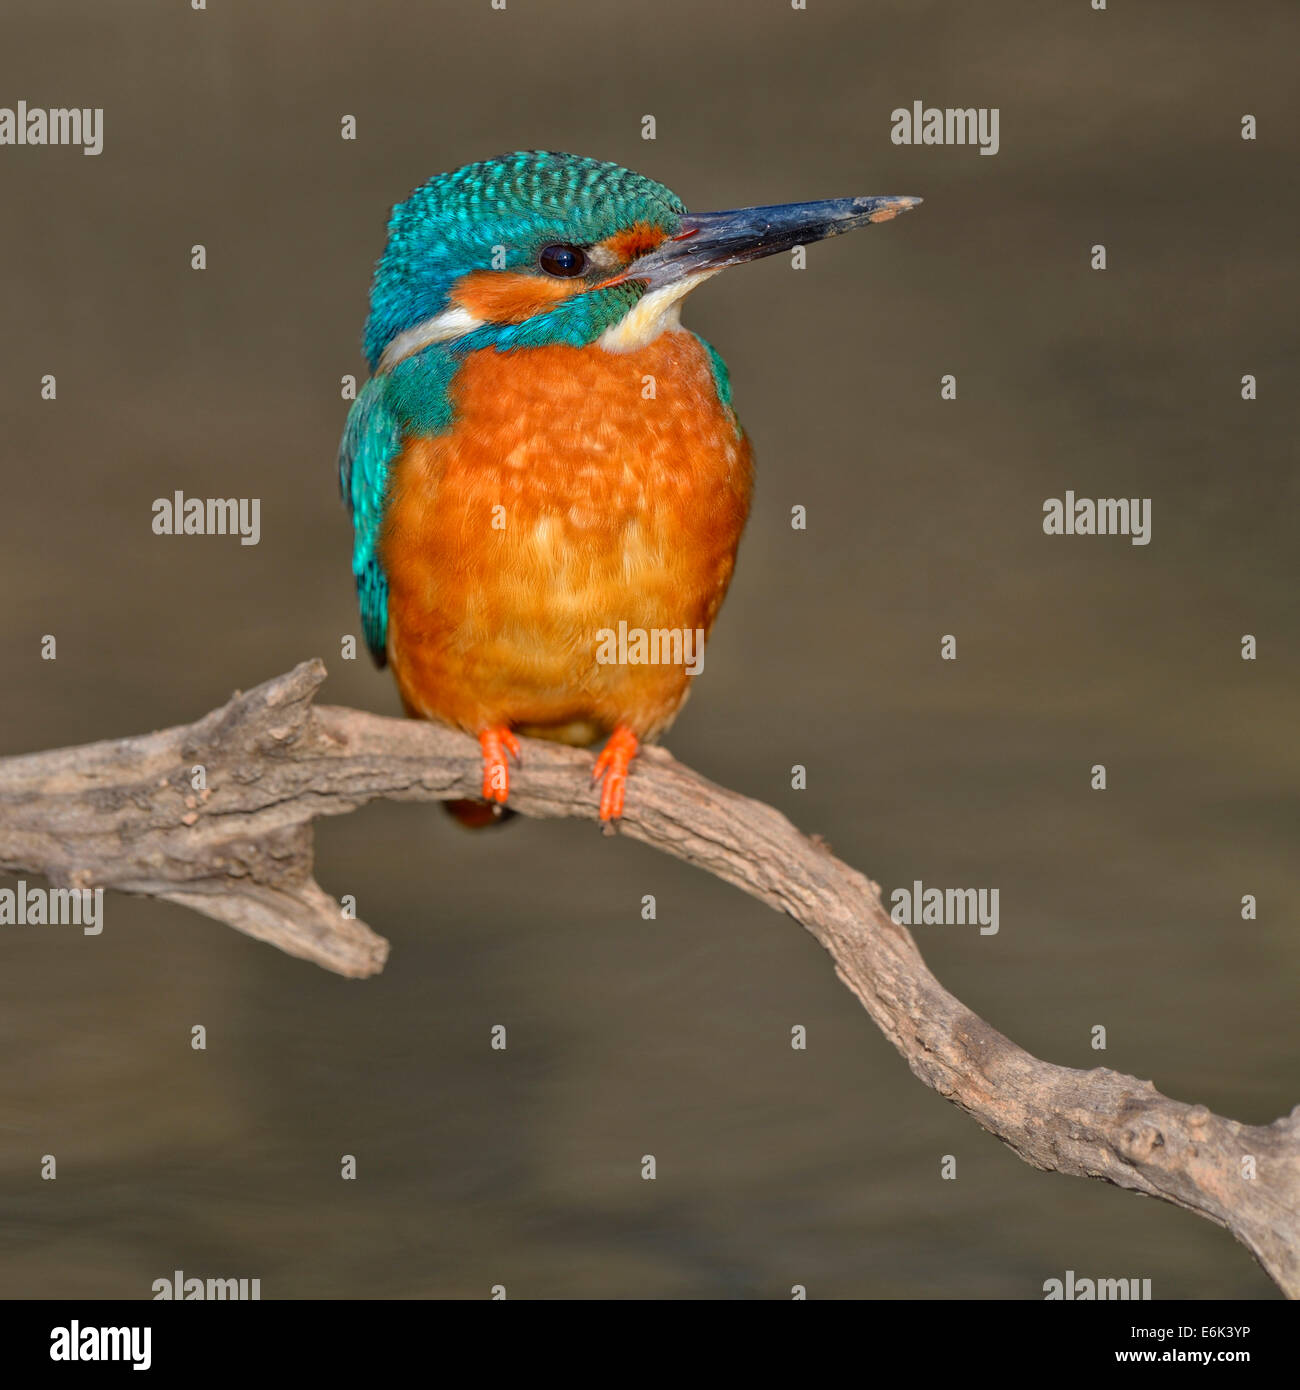 Kingfisher (Alcedo atthis), male with clay at the tip of its beak, on perch in the evening light, Swabian Alb Biosphere Reserve Stock Photo